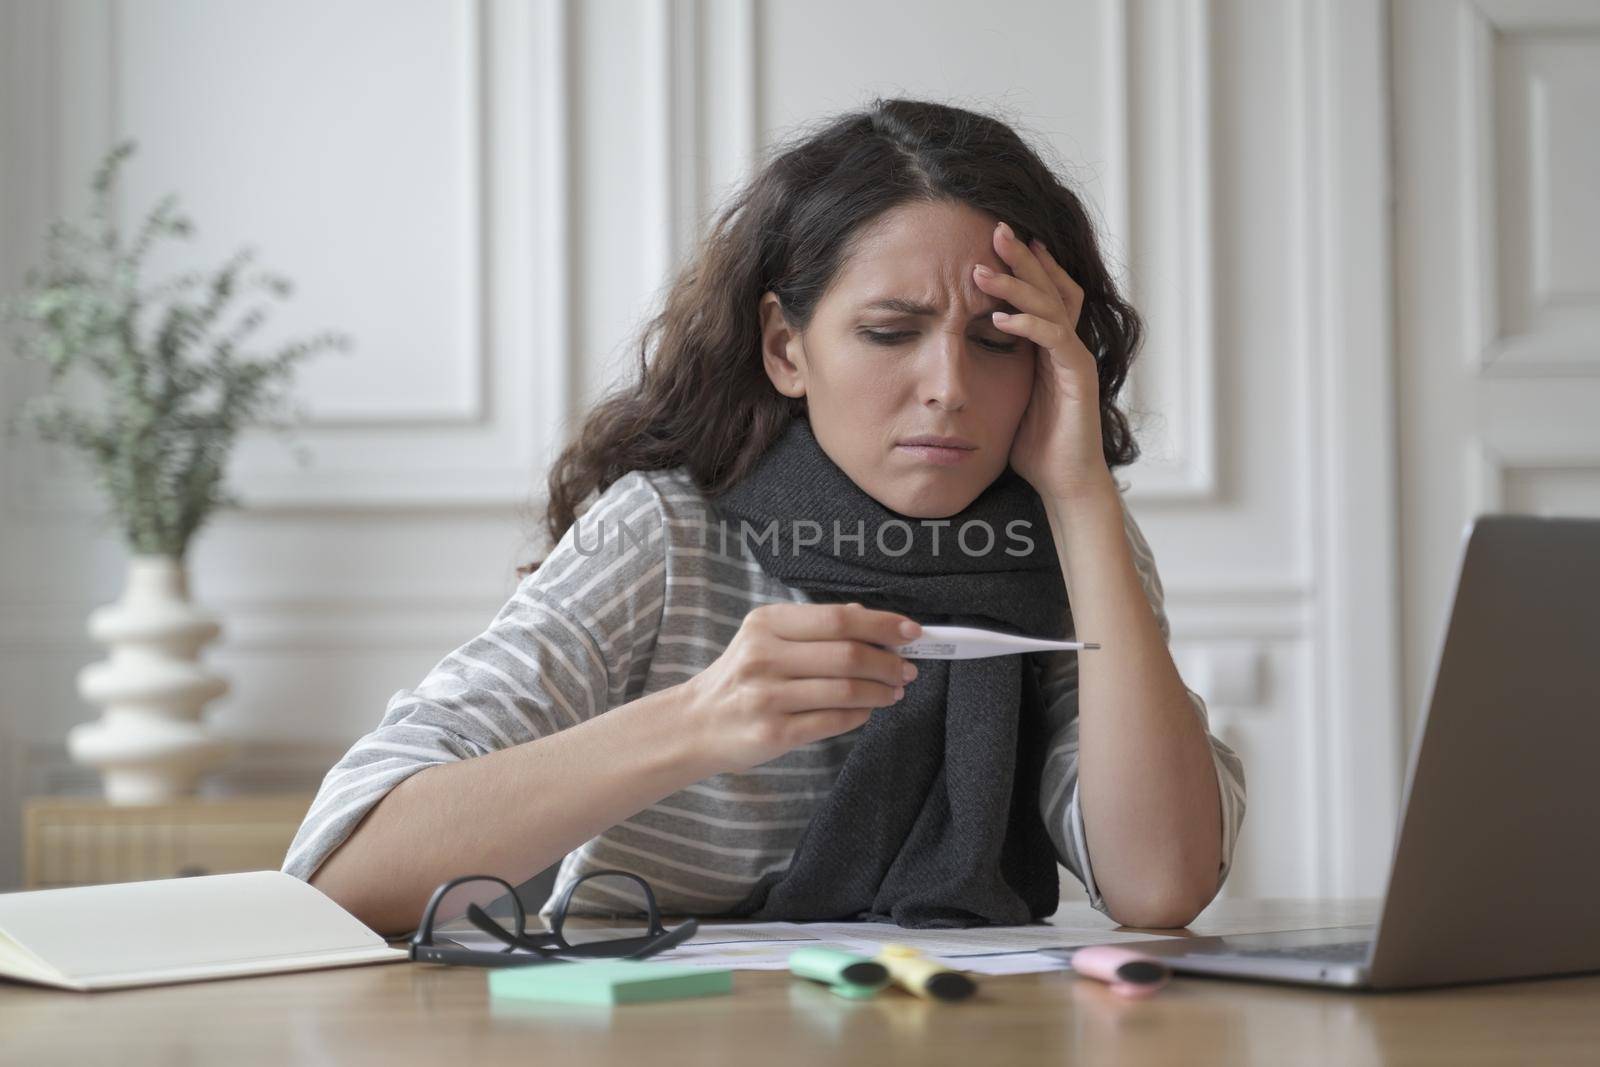 Unhealthy spanish woman wrapped in warm knitted scarf looking anxiously on digital thermometer by vkstock